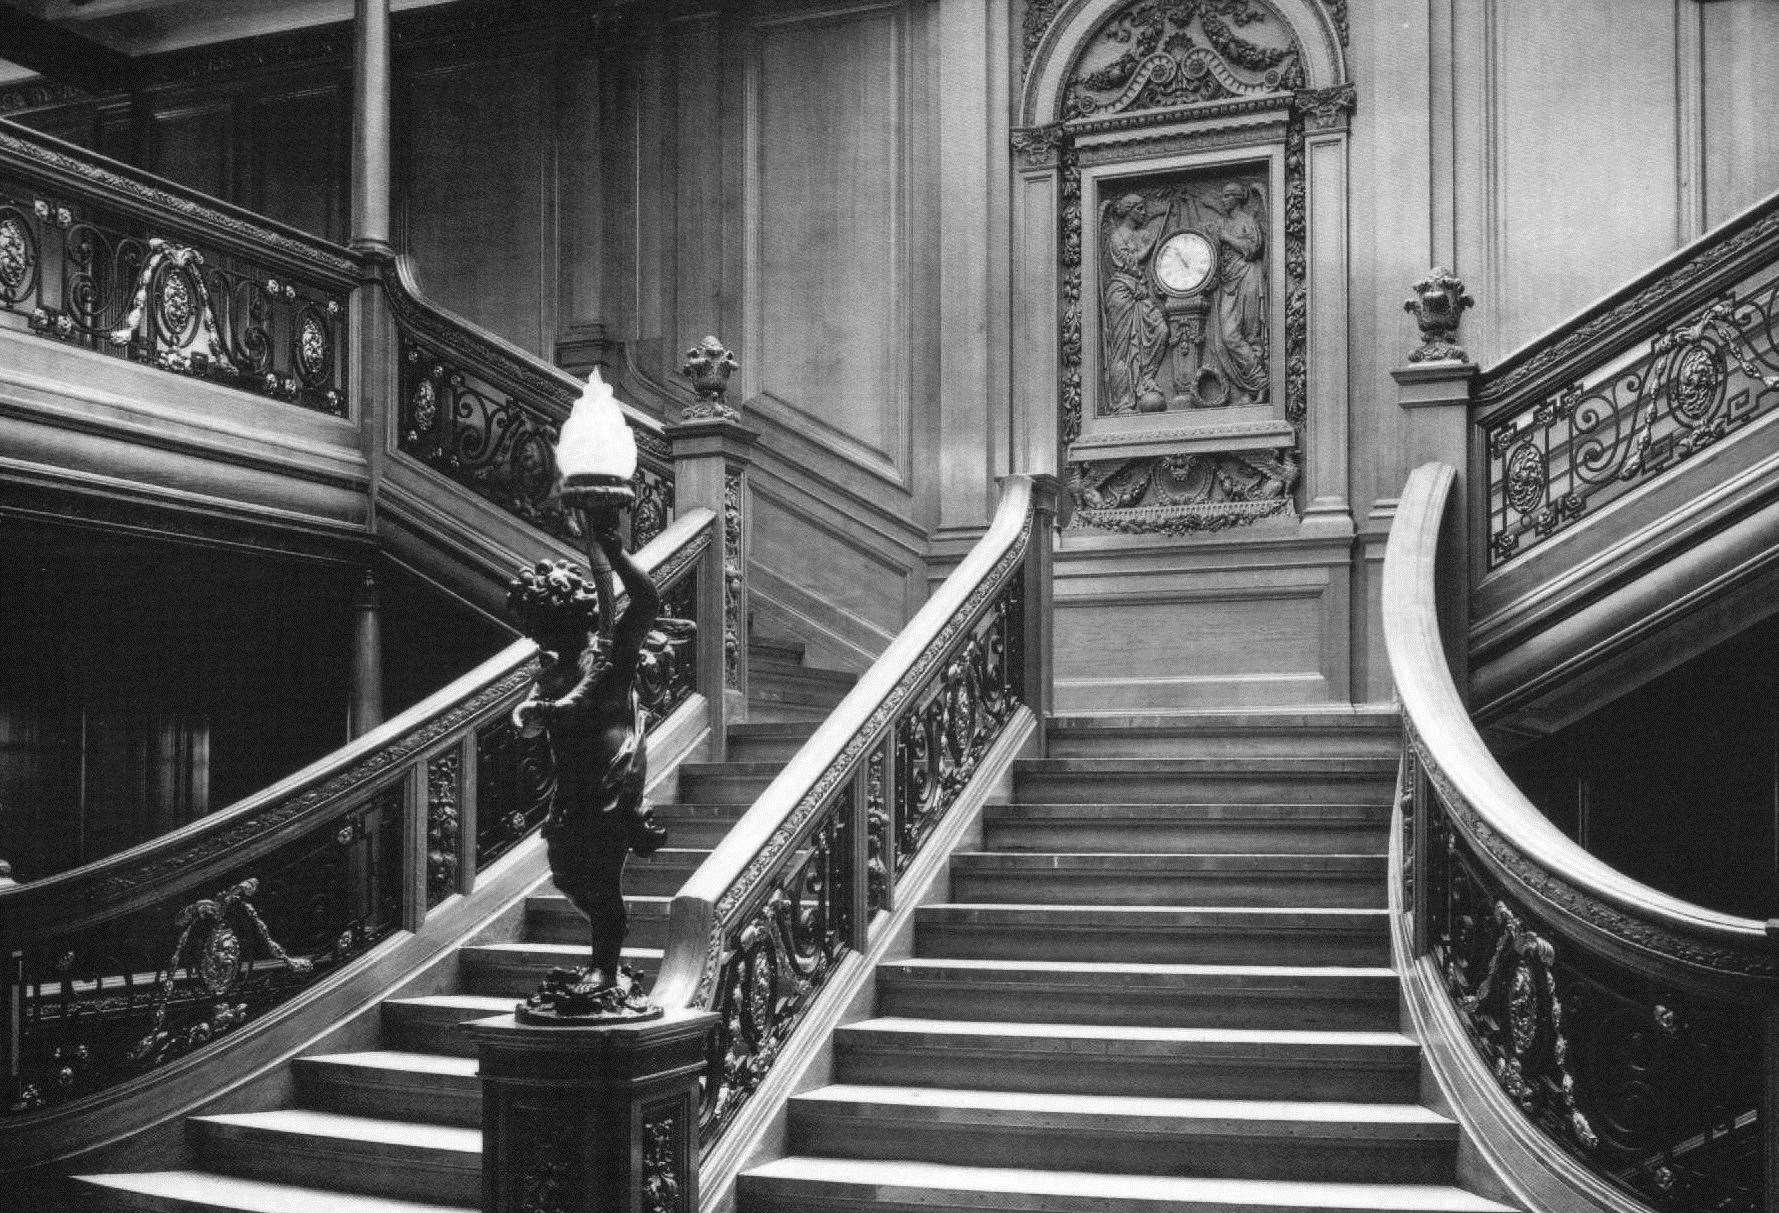 The Titanic's grand staircase